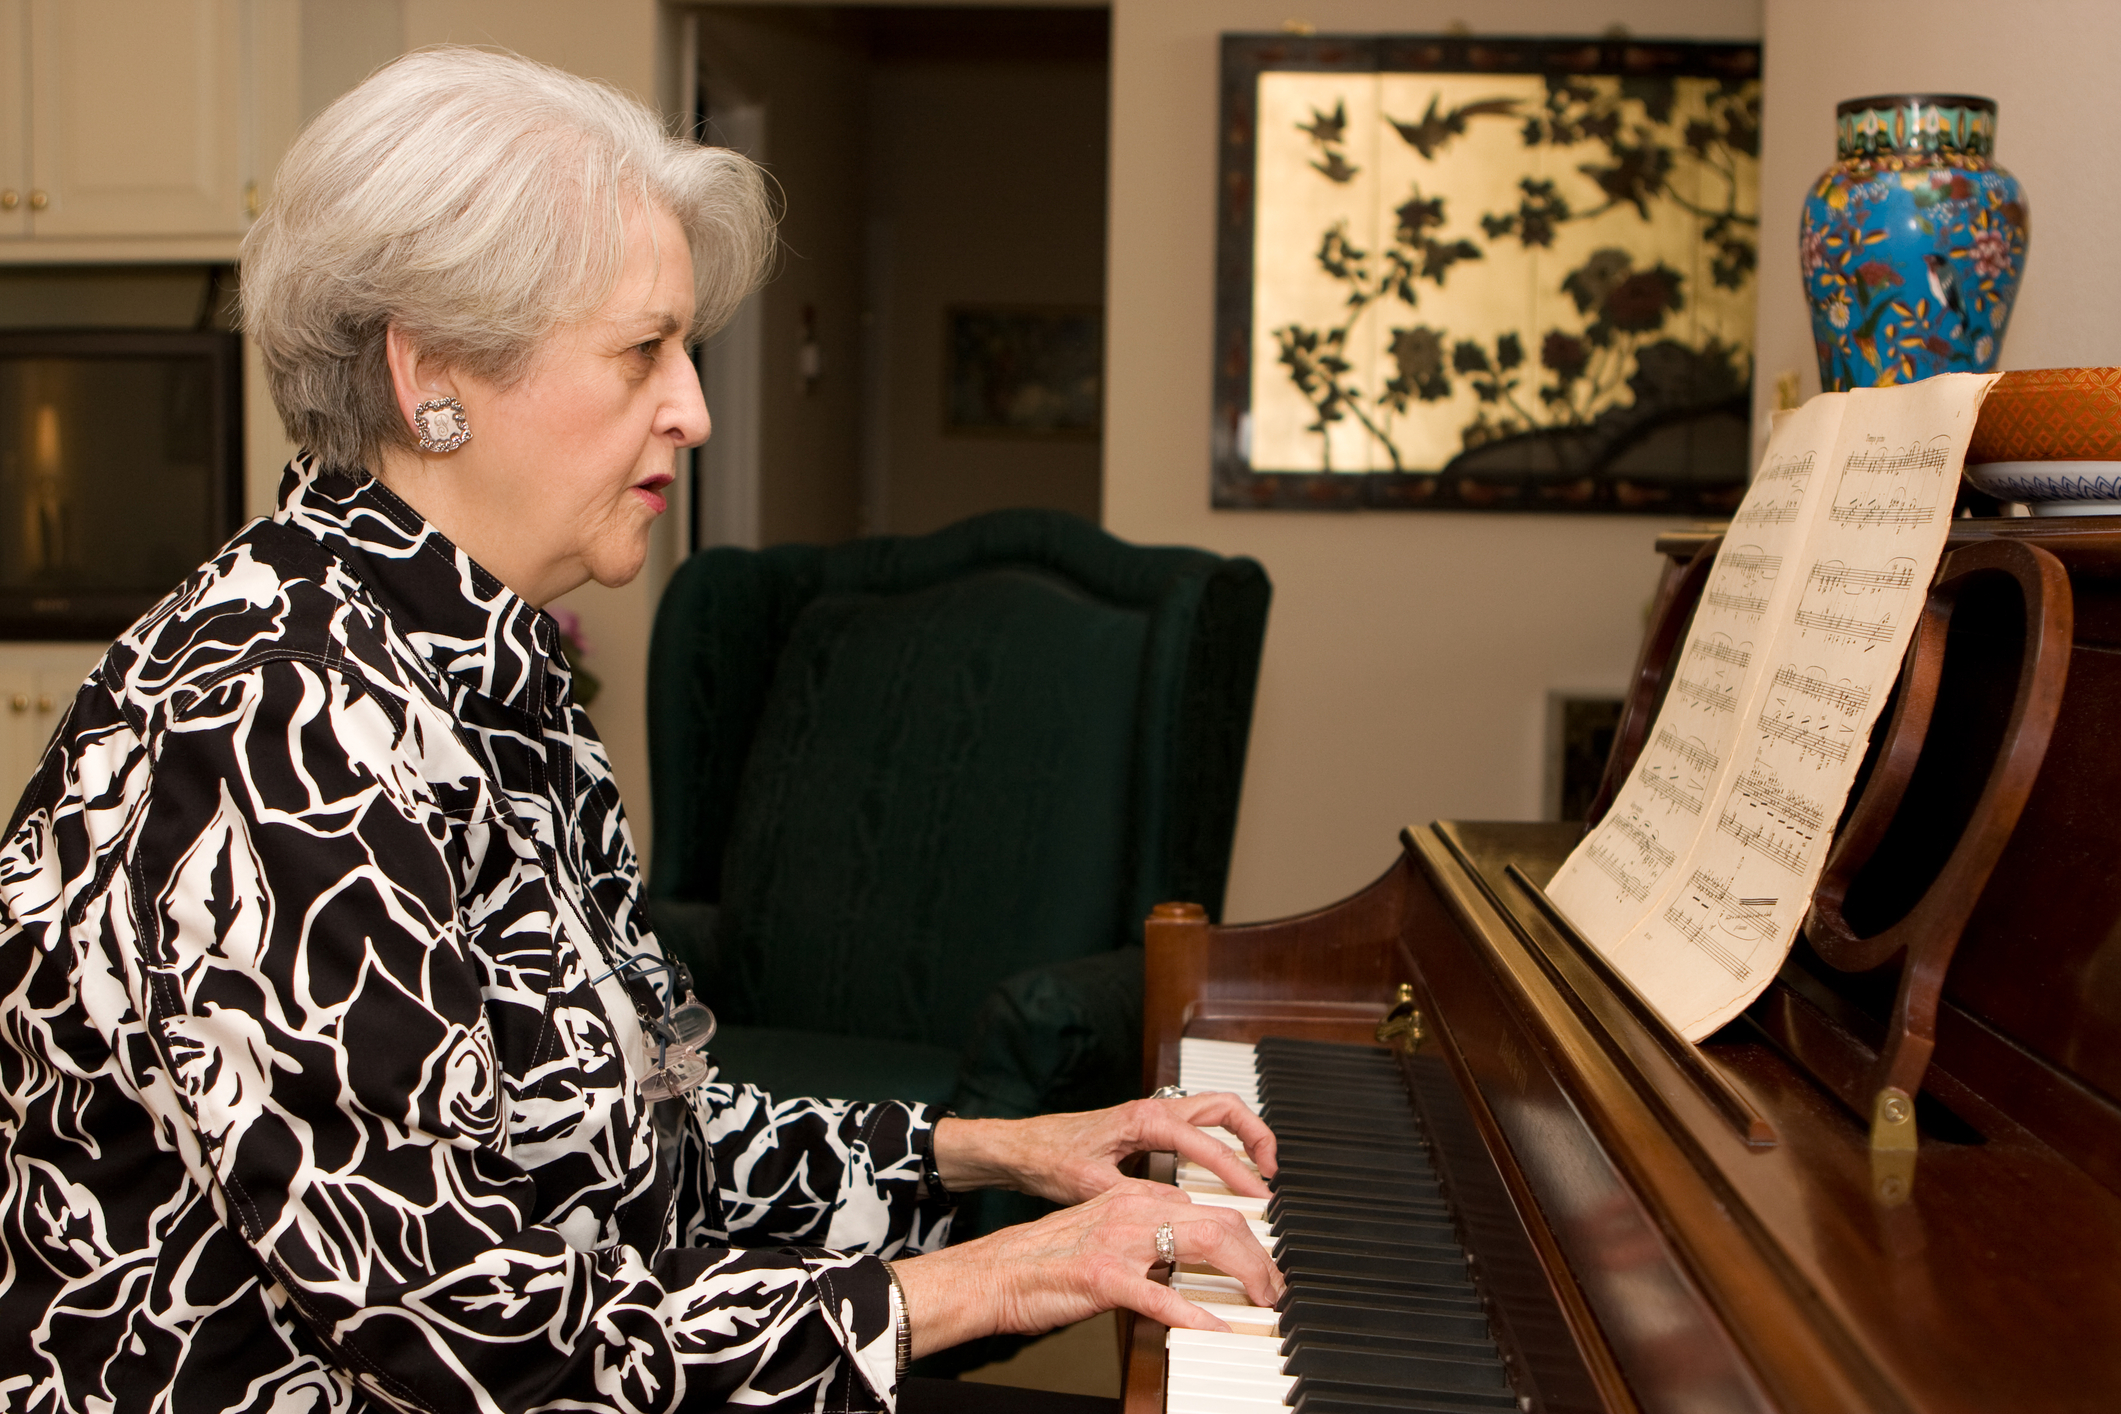 http://www.dreamstime.com/stock-photos-senior-woman-playing-piano-image11729183